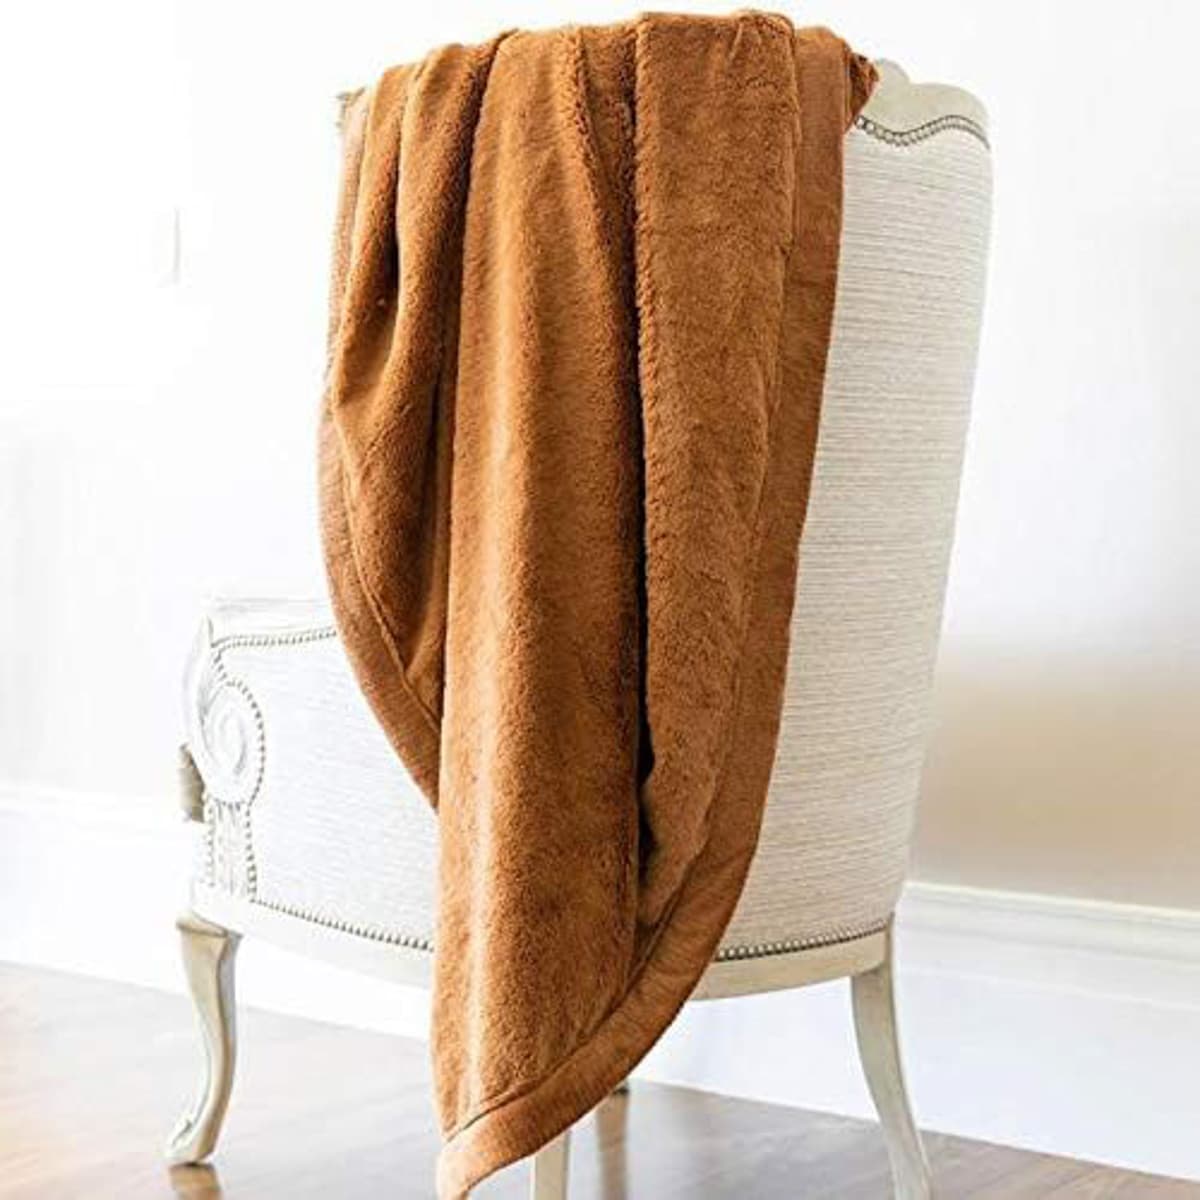 Brown blanket hanging over the back of a chair.